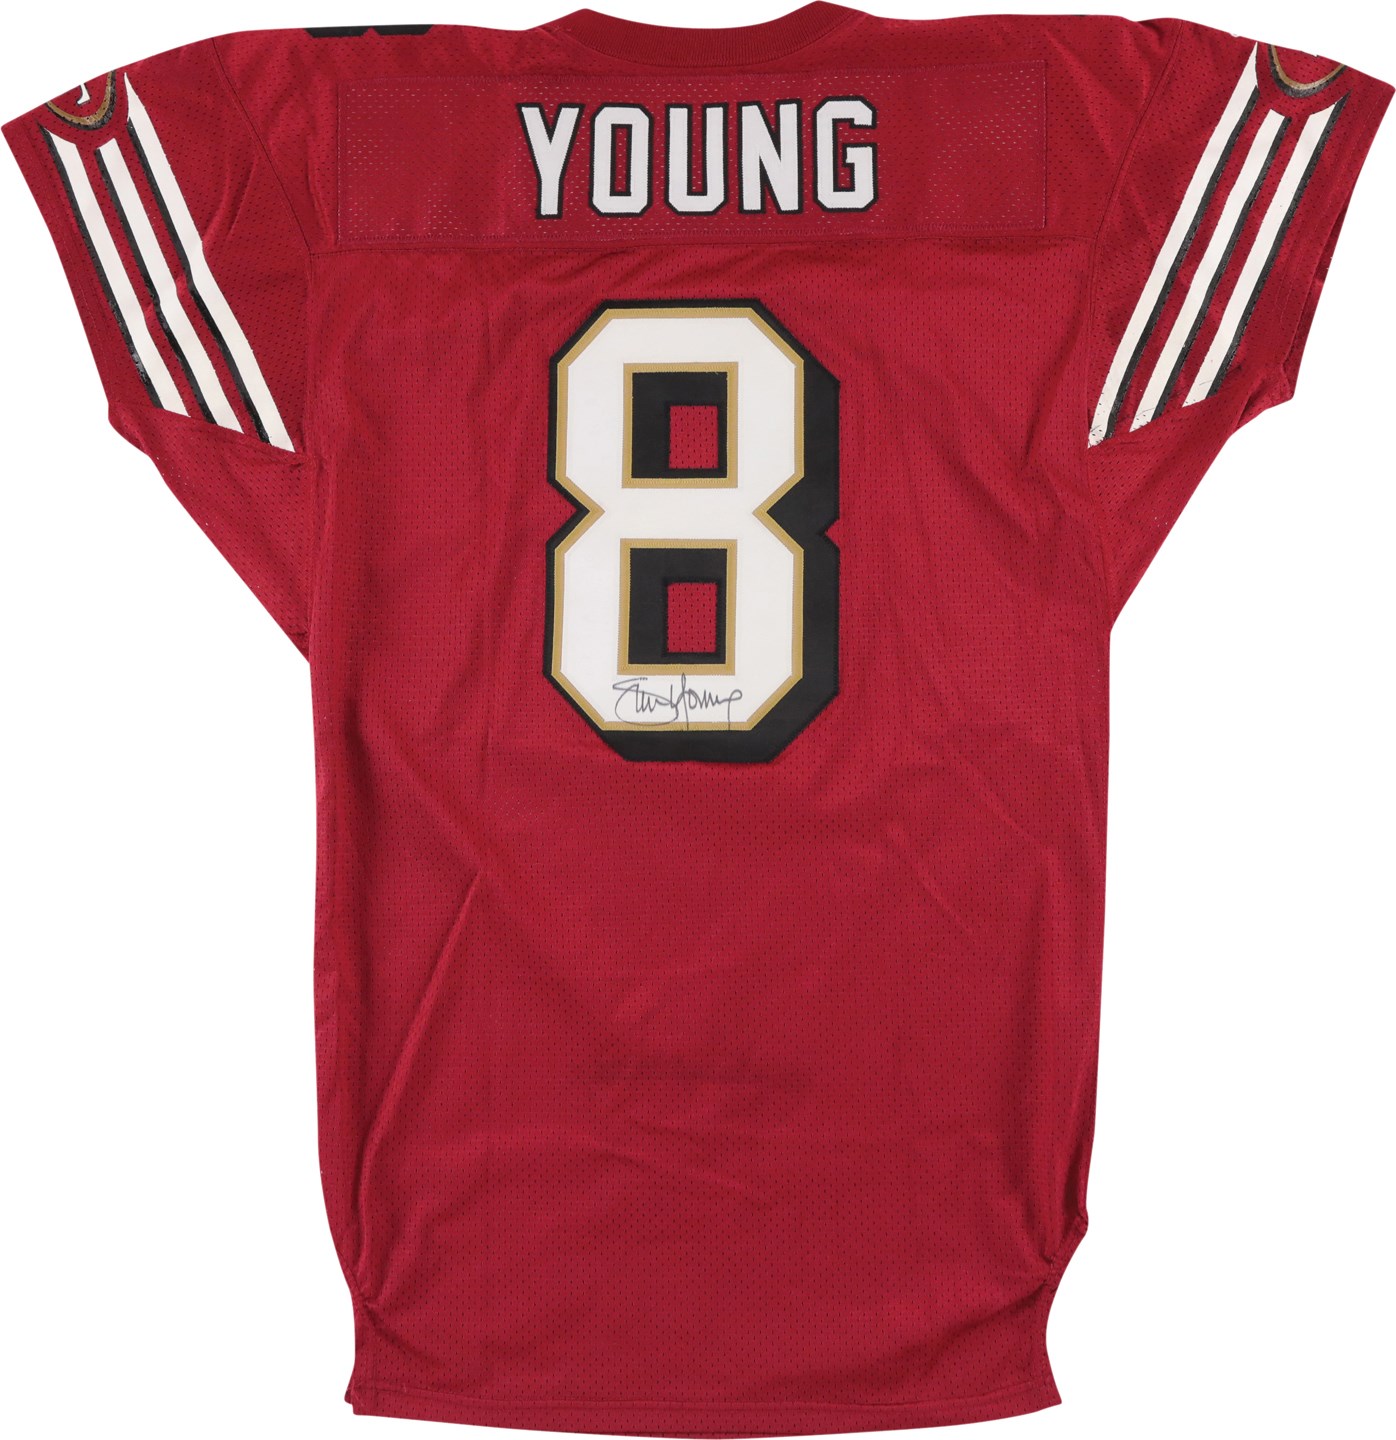 1999 Steve Young San Francisco 49ers Signed Game Issued Jersey (PSA)